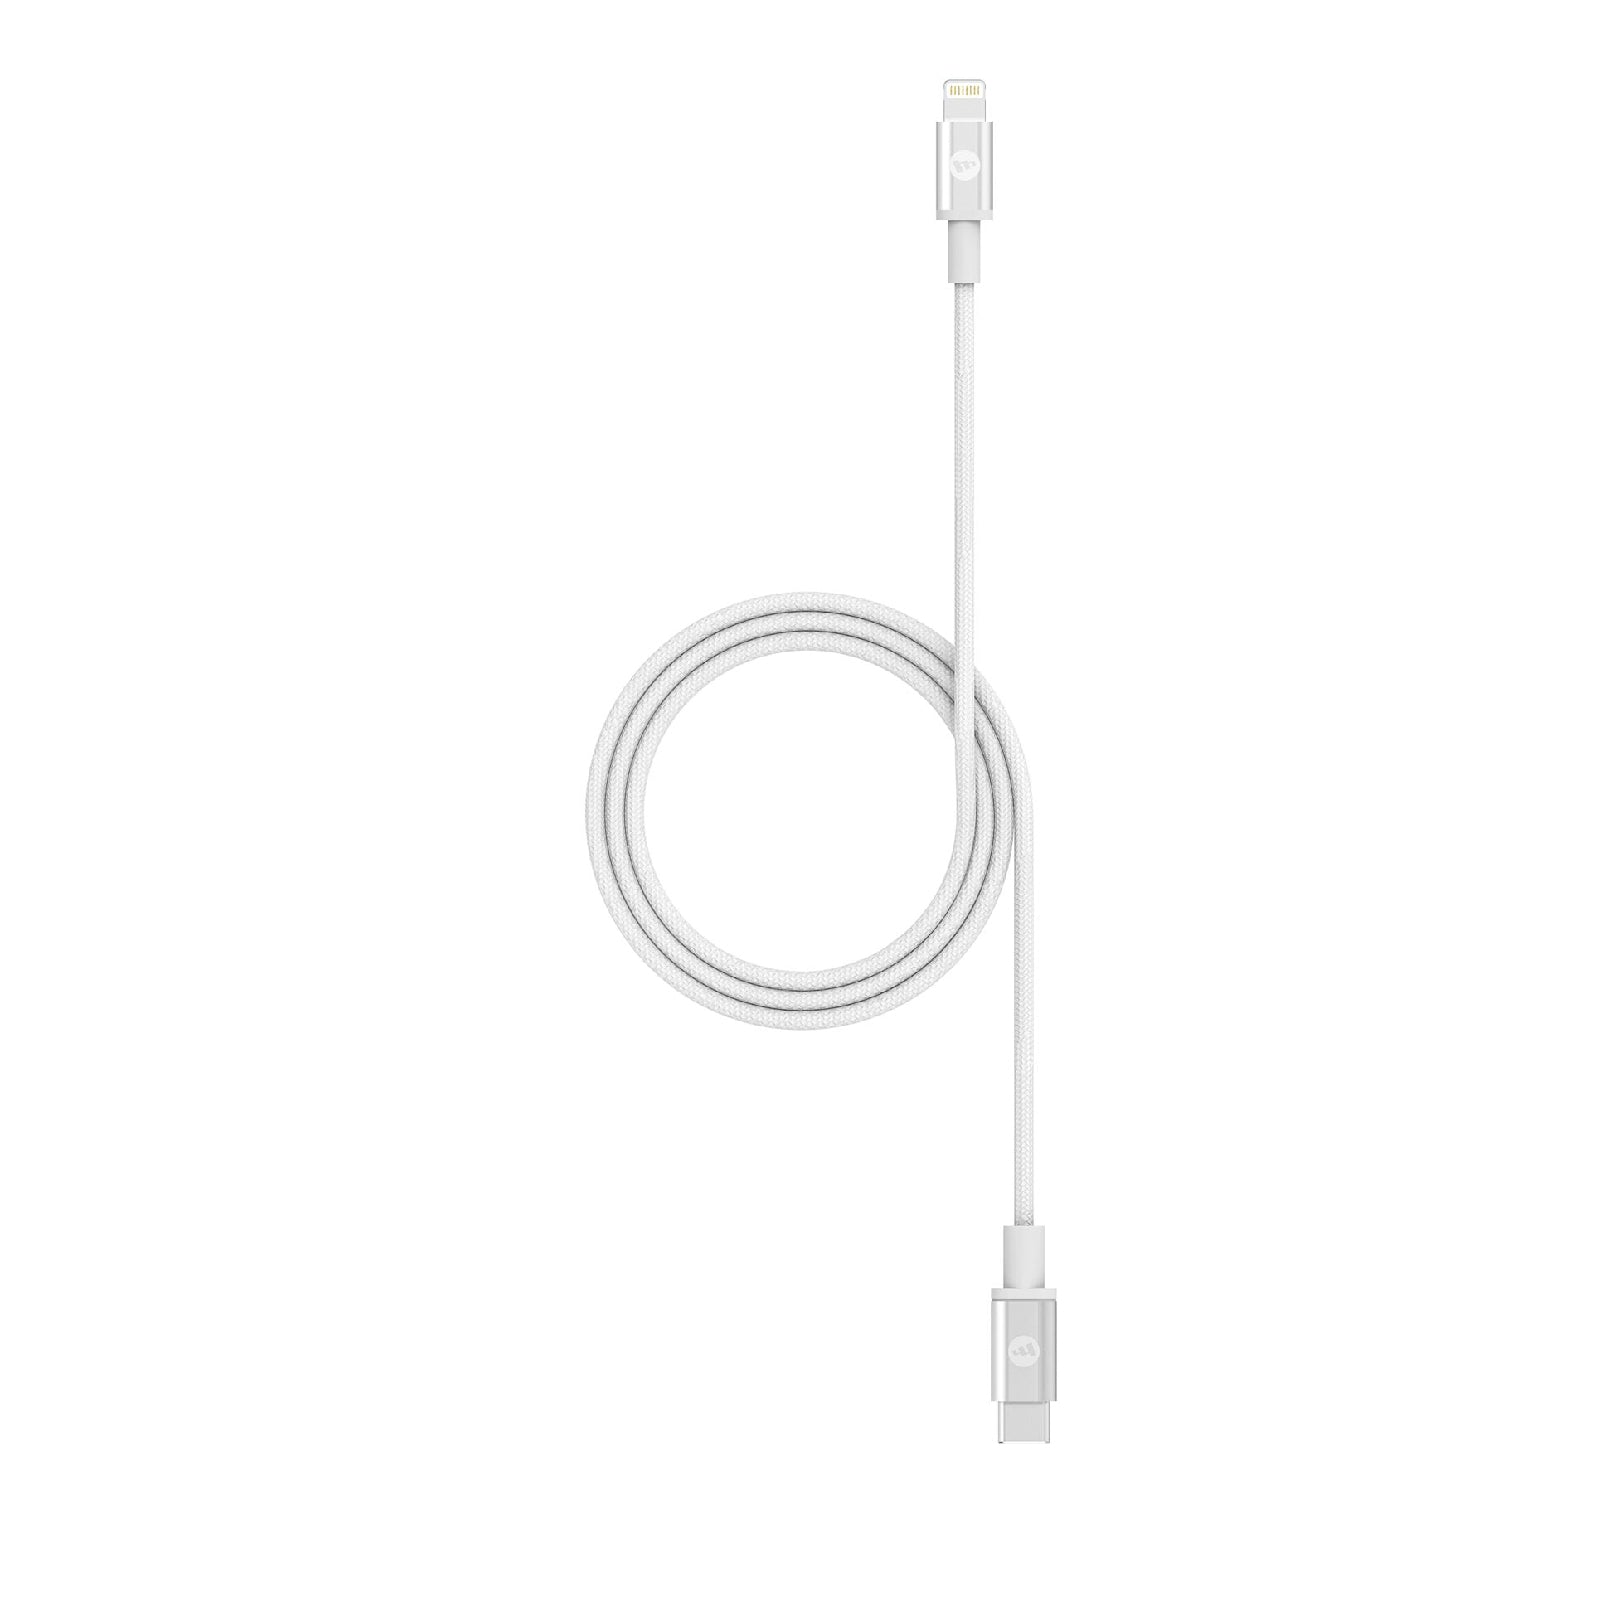 Mophie USB-C to Lightning Cable (1 m)